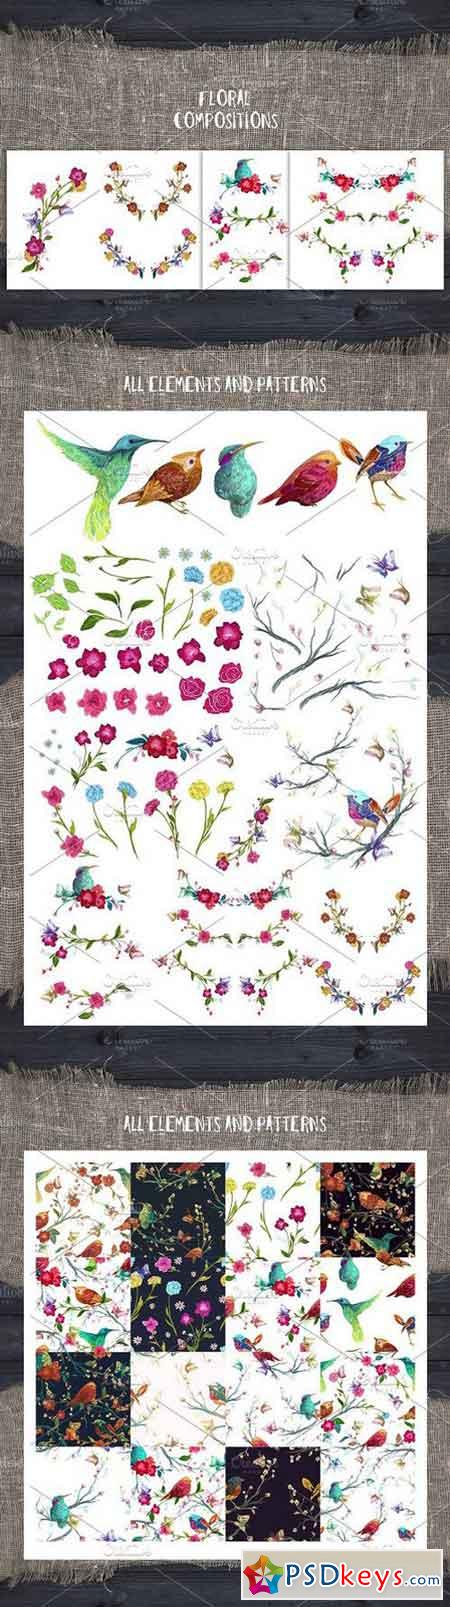 Embroidery flowers and birds 1397147